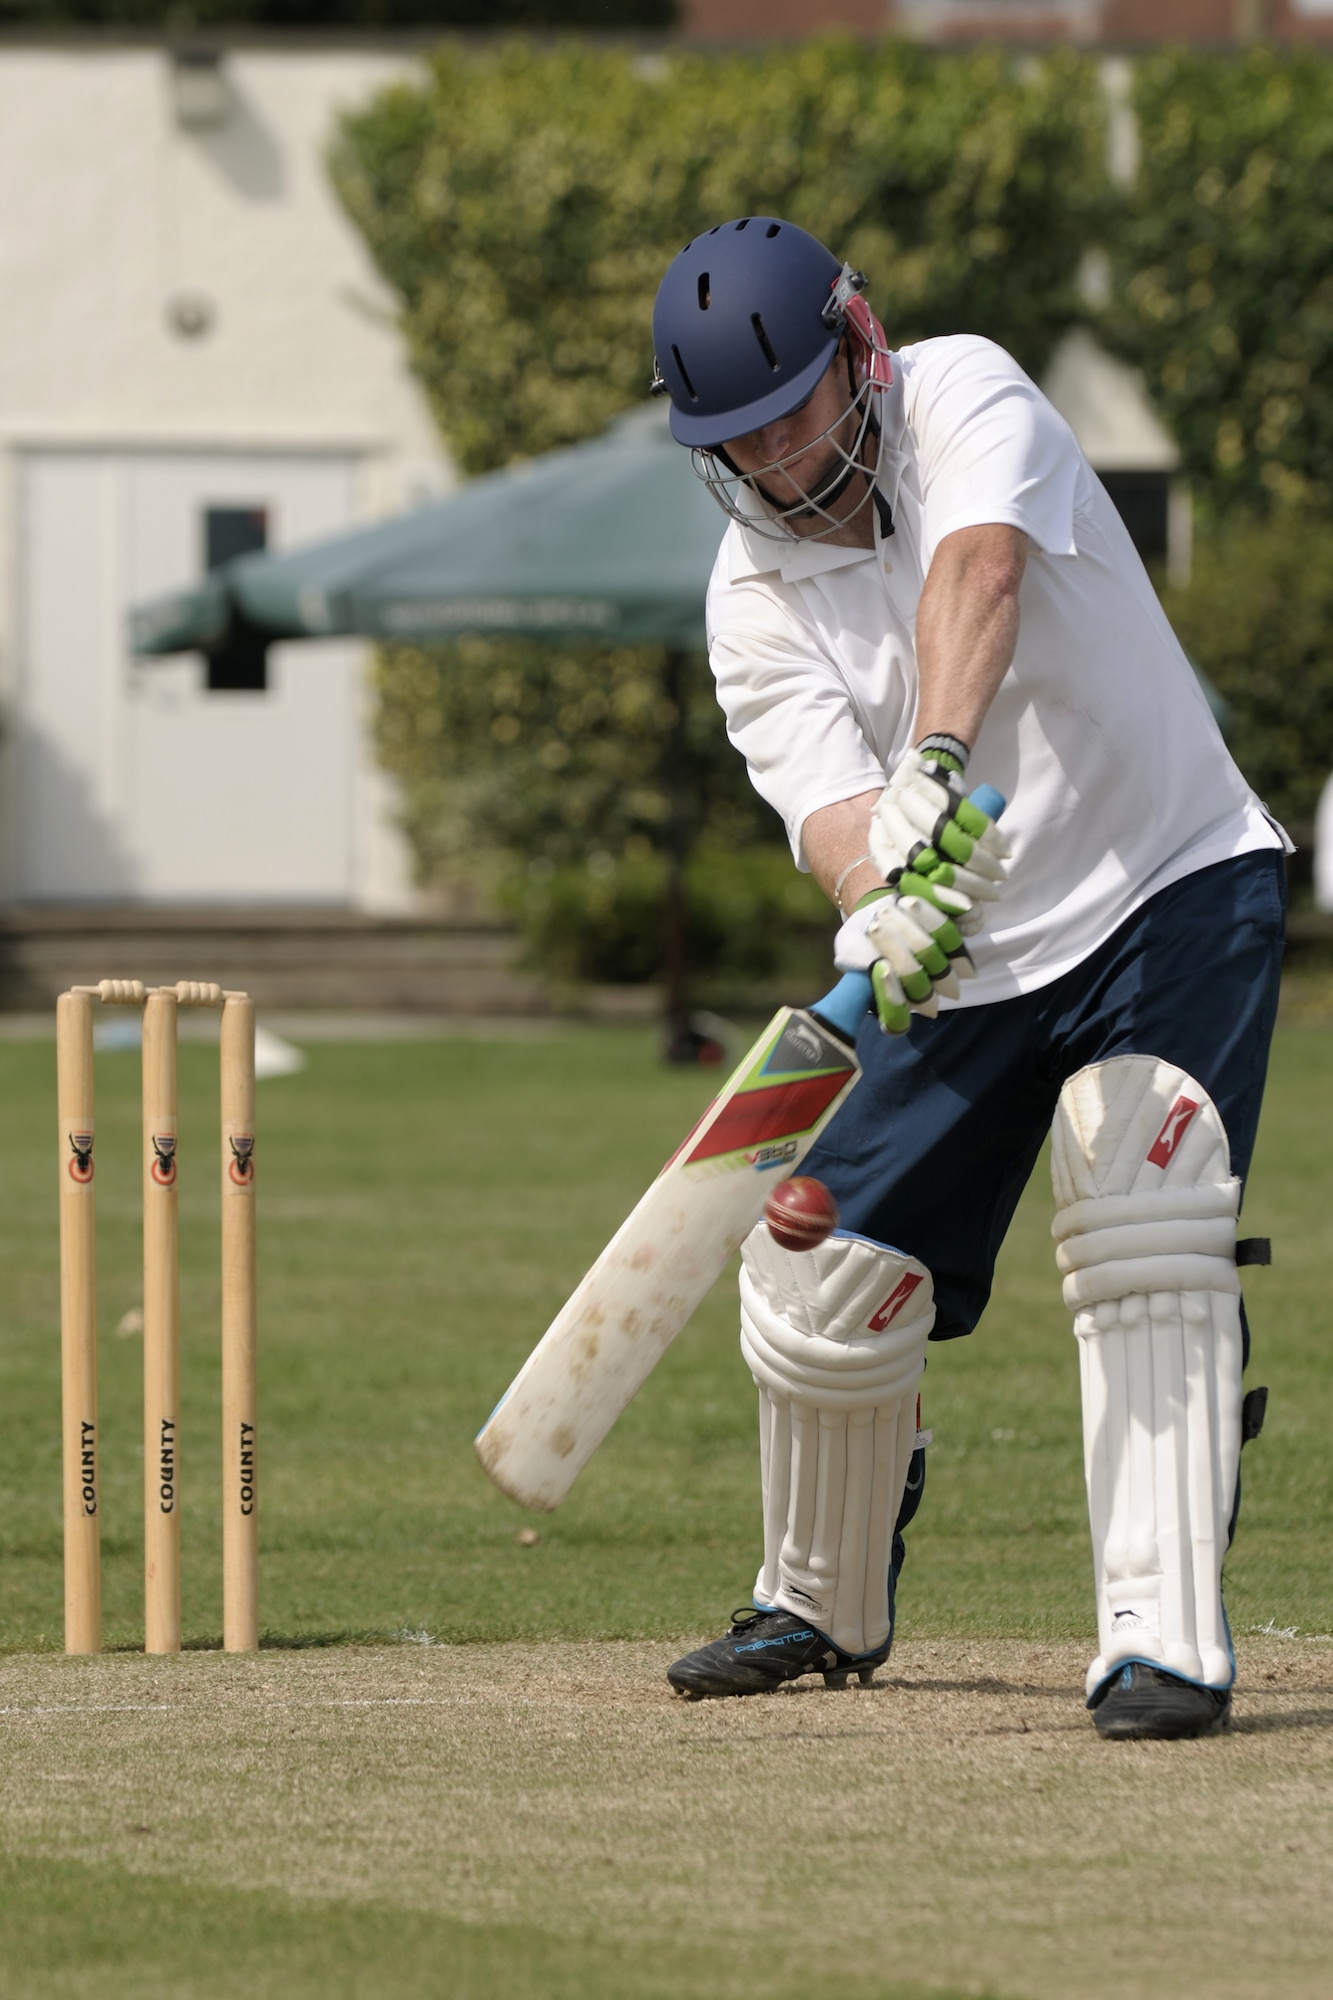 LONGSTANTON, United Kingdom – Master Sgt. Nathan Pollard, 423rd Security Forces Squadron, swings for the ball a Longstanton Grasshopper bowled during the first game played by the team Aug. 19 at Longstanton Bowls Club in Longstanton, United Kingdom. Behind each batsman is a target called a wicket. One designated member of the fielding team, the bowler, is given a ball and attempts to bowl the ball from one end of the pitch to the wicket behind the batsman on the other side of the pitch. The batsman tries to prevent the ball from hitting the wicket by striking the ball with a bat. If the bowler succeeds in hitting the wicket, or if the ball, after being struck by the batsman, is caught by the fielding team before it touches the ground, the batsman is dismissed. (U.S. Air Force photo by Master Sgt. John Barton)